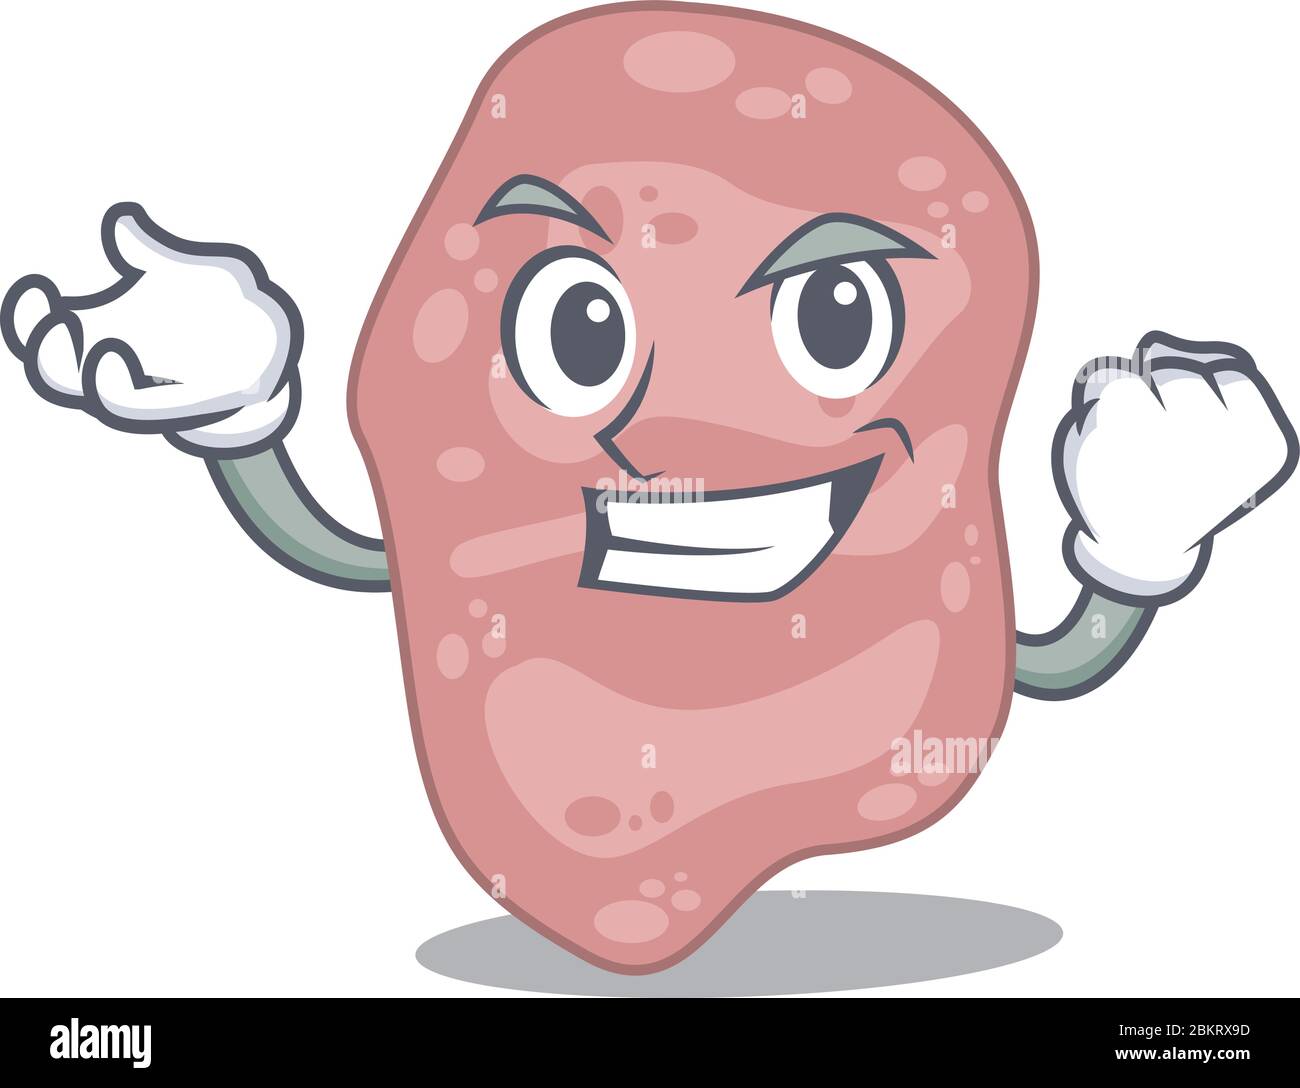 A dazzling verrucomicrobia mascot design concept with happy face Stock Vector